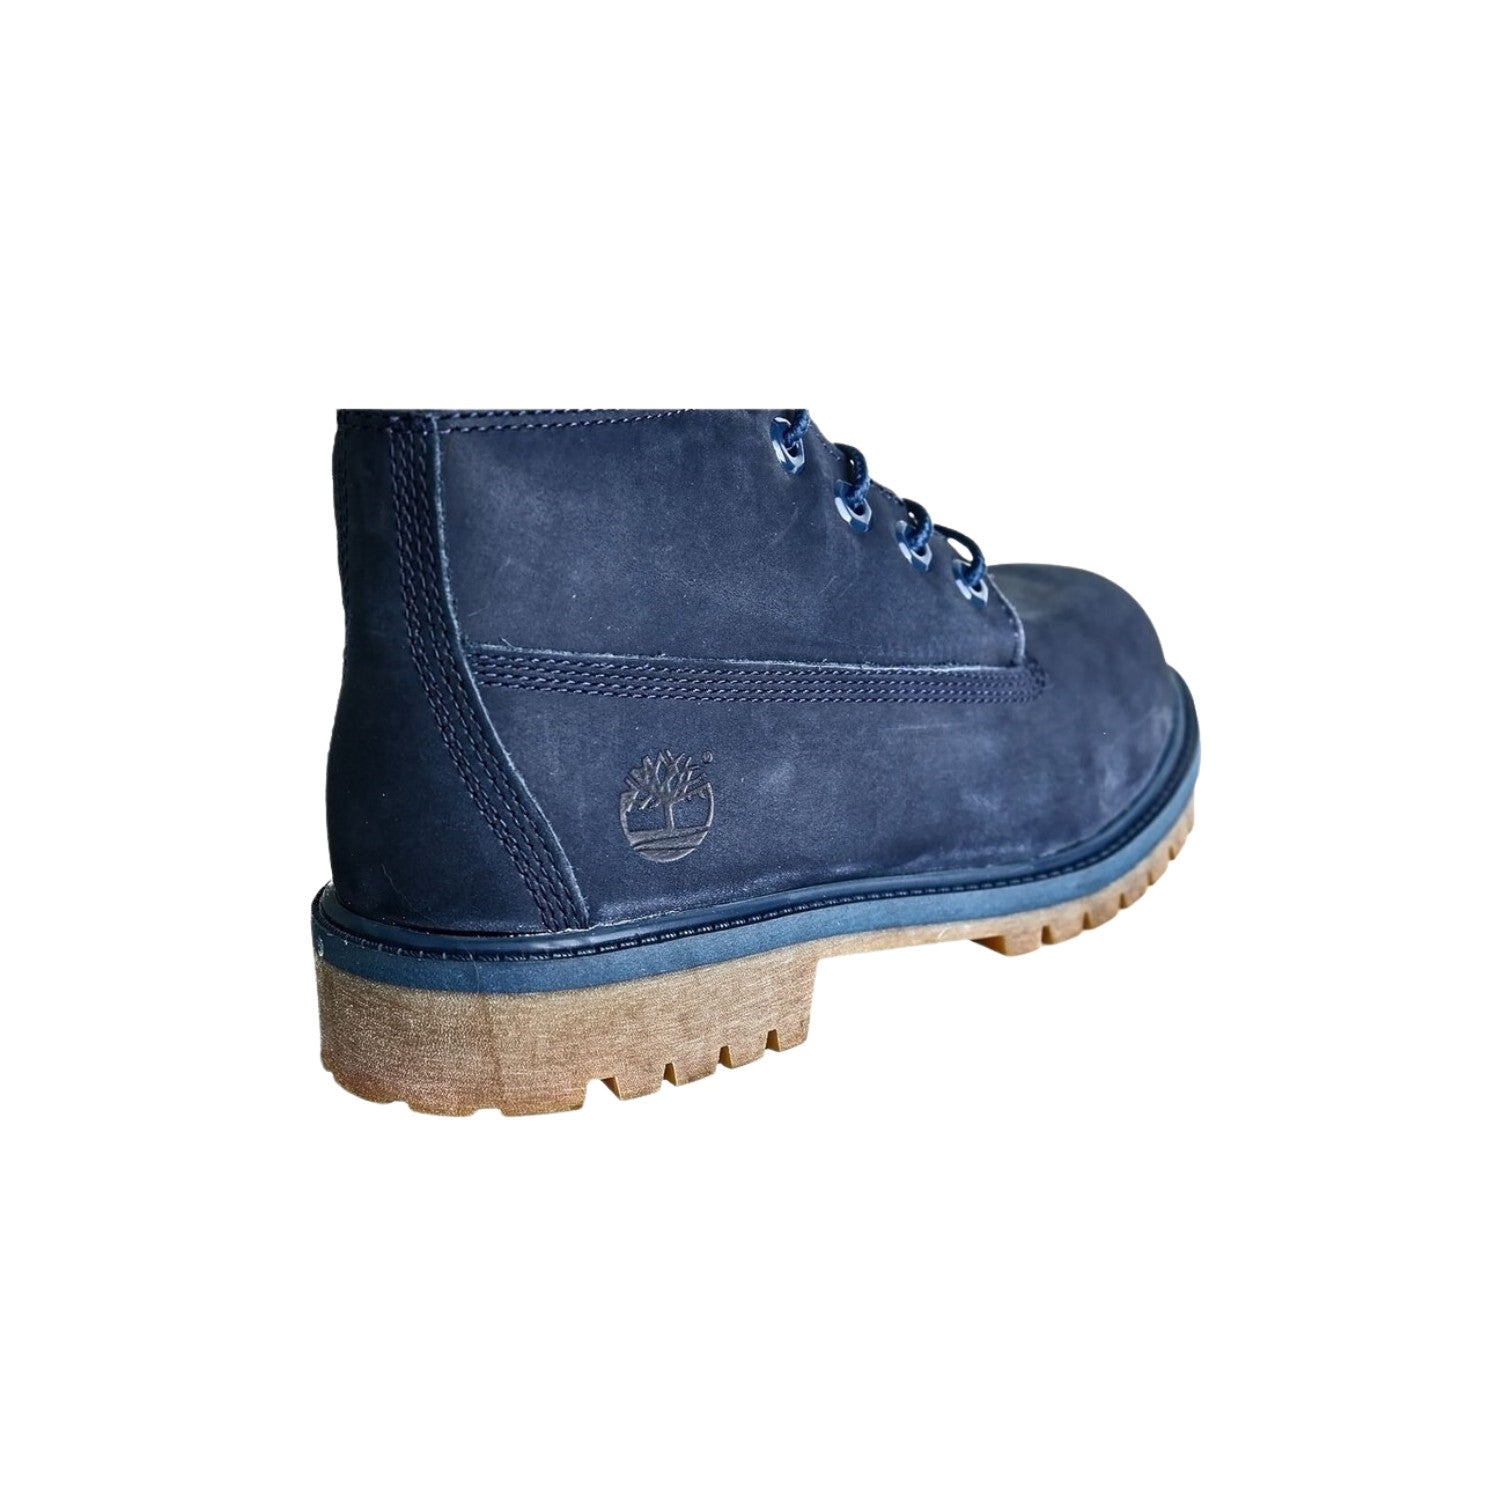 Timberland 6 In Premium Boots Big Kids Style : Tb)3793a